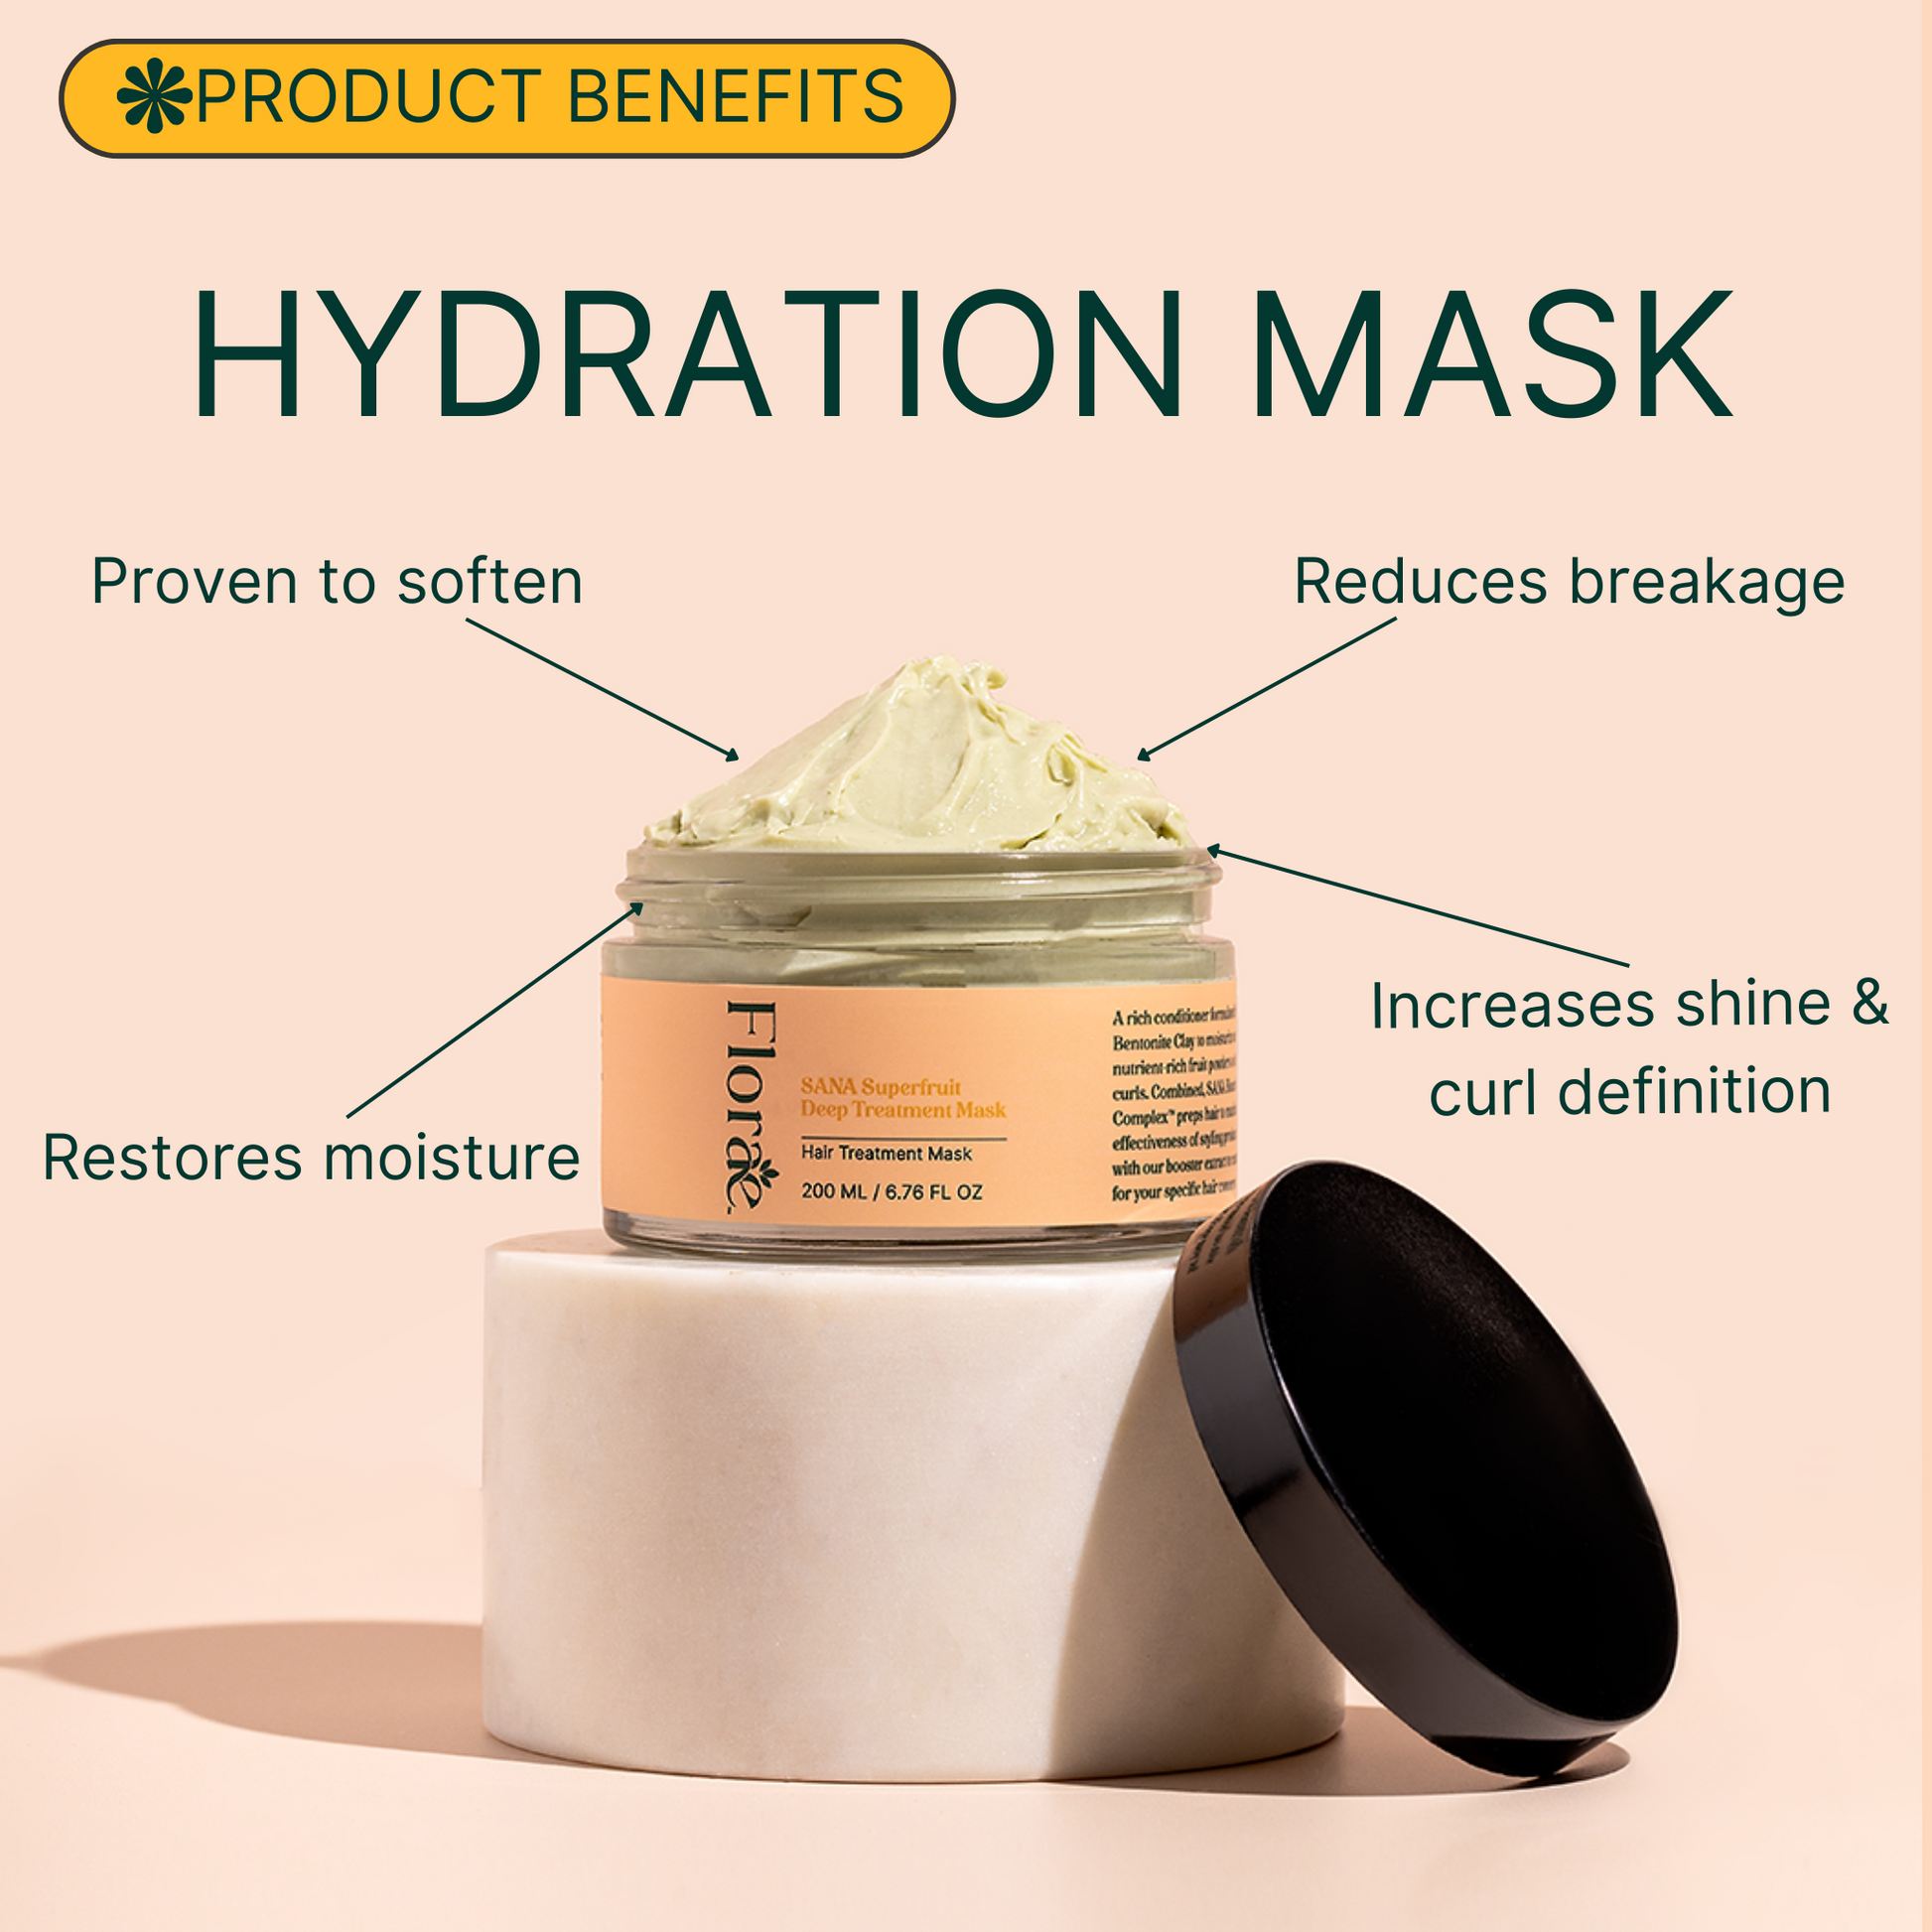 hydration mask benefits infographic